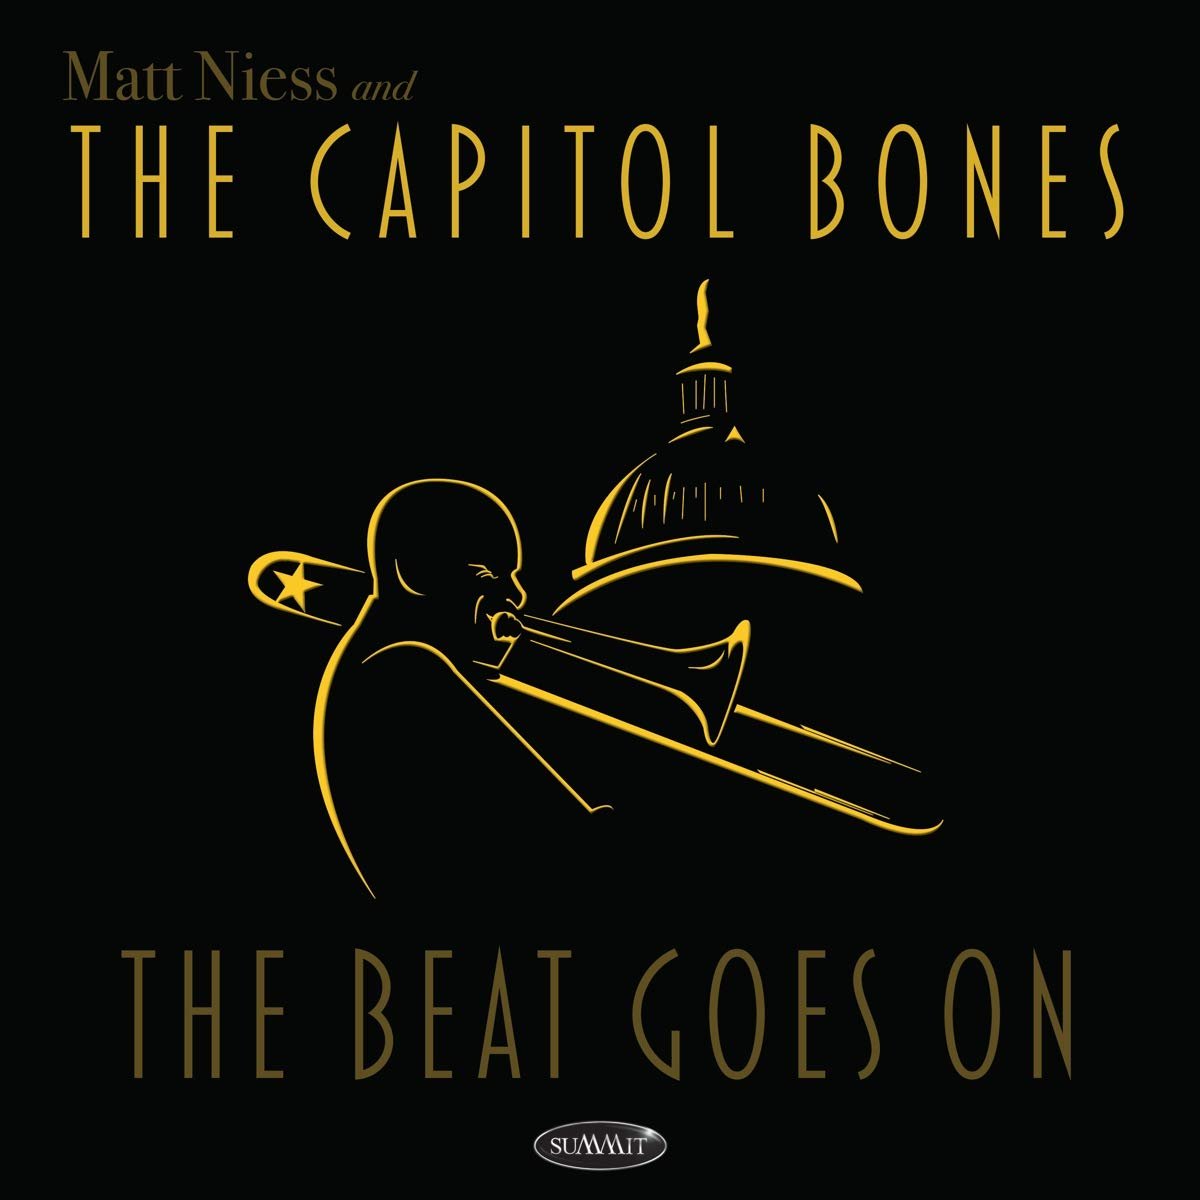 <b>Matt Neiss and The Capitol Bones</b></br>The Beat Goes On</br><i><small>Stereo Master</small></I>